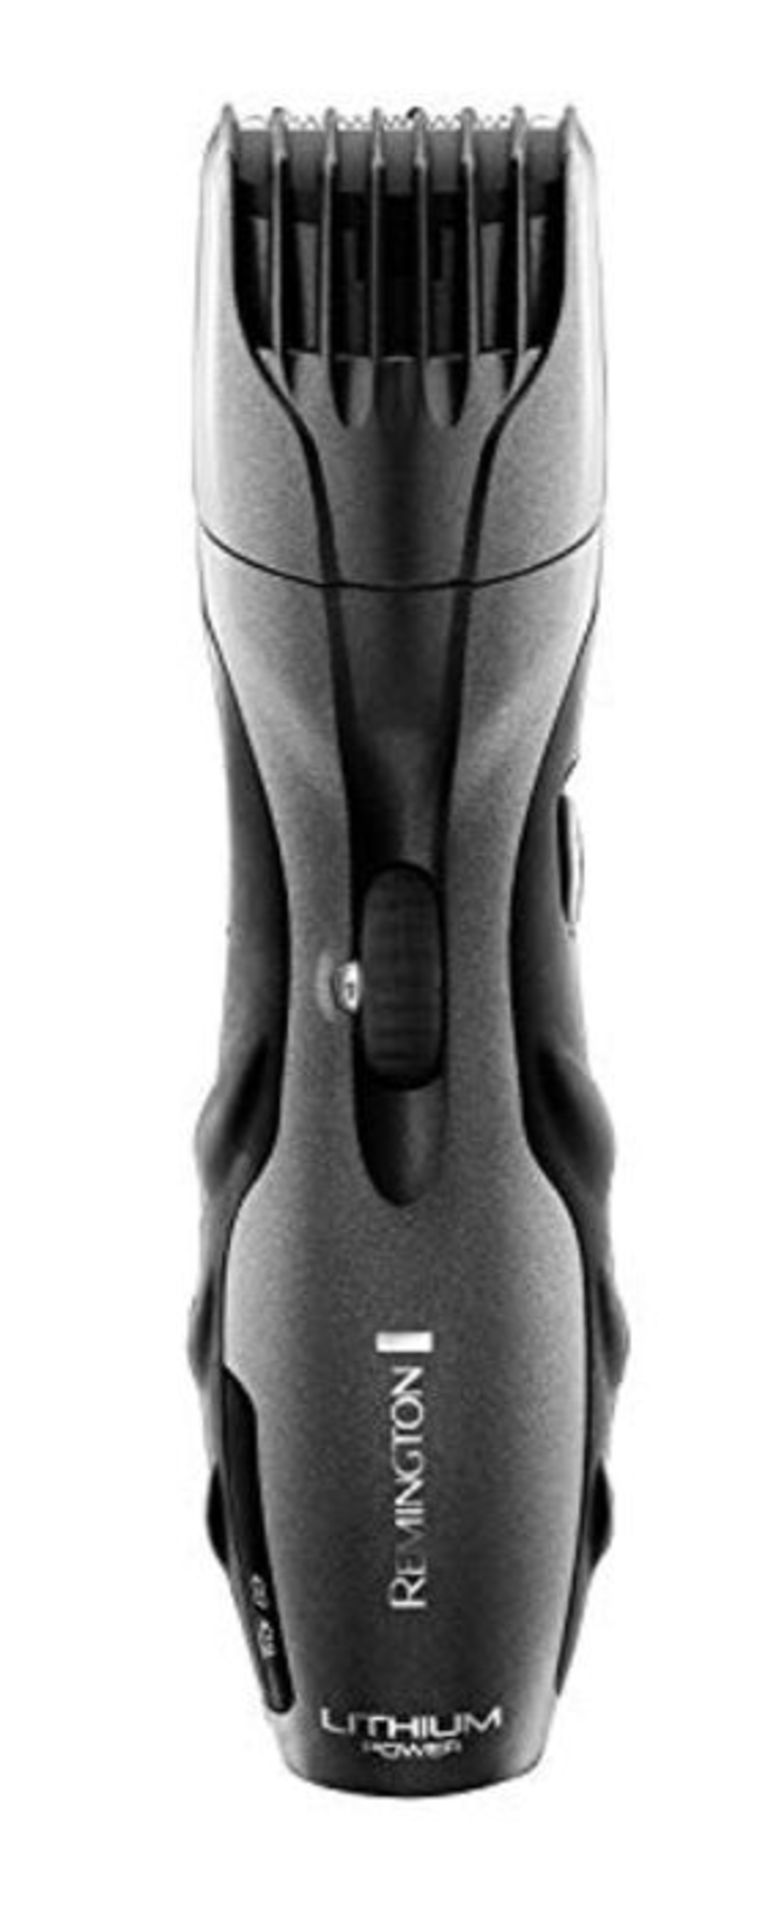 Remington Mens Cordless Lithium Barba Beard Trimmer, Up to 60 Minutes on 1 Charge - MB